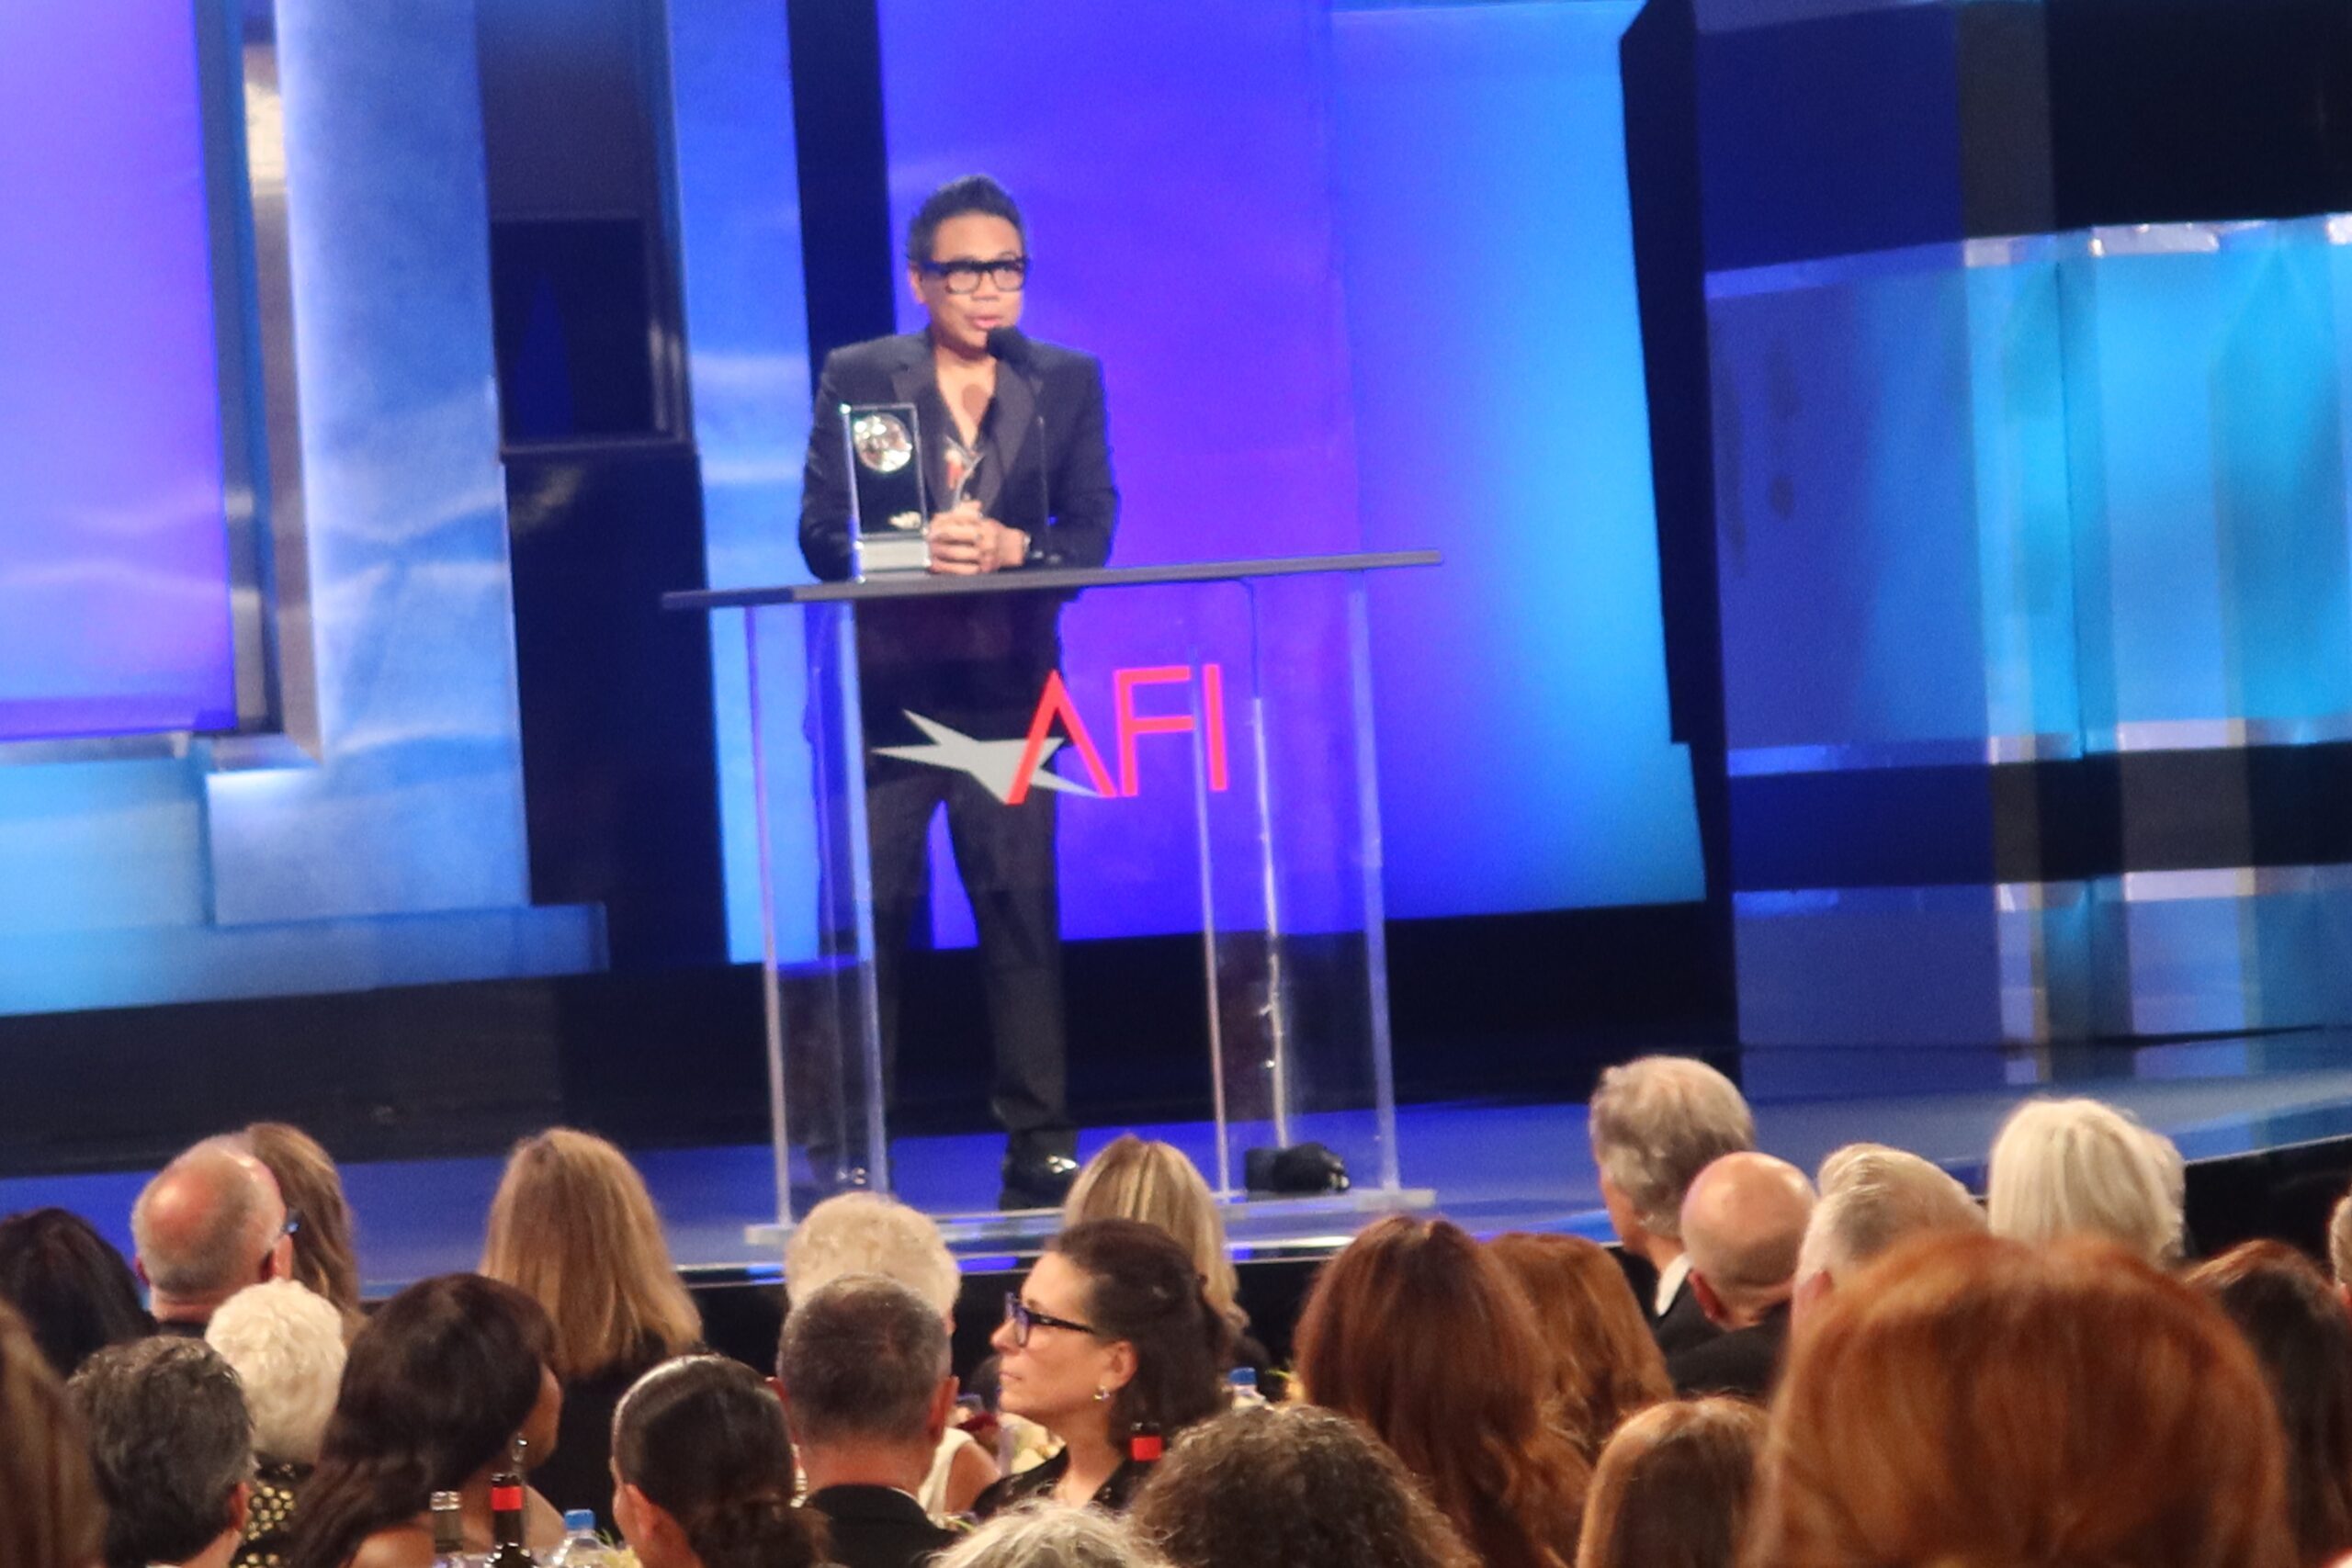 [Only IN Hollywood] Stories of American dream, recovery, and skinny-dipping as AFI honors Nicole Kidman, Matthew Libatique